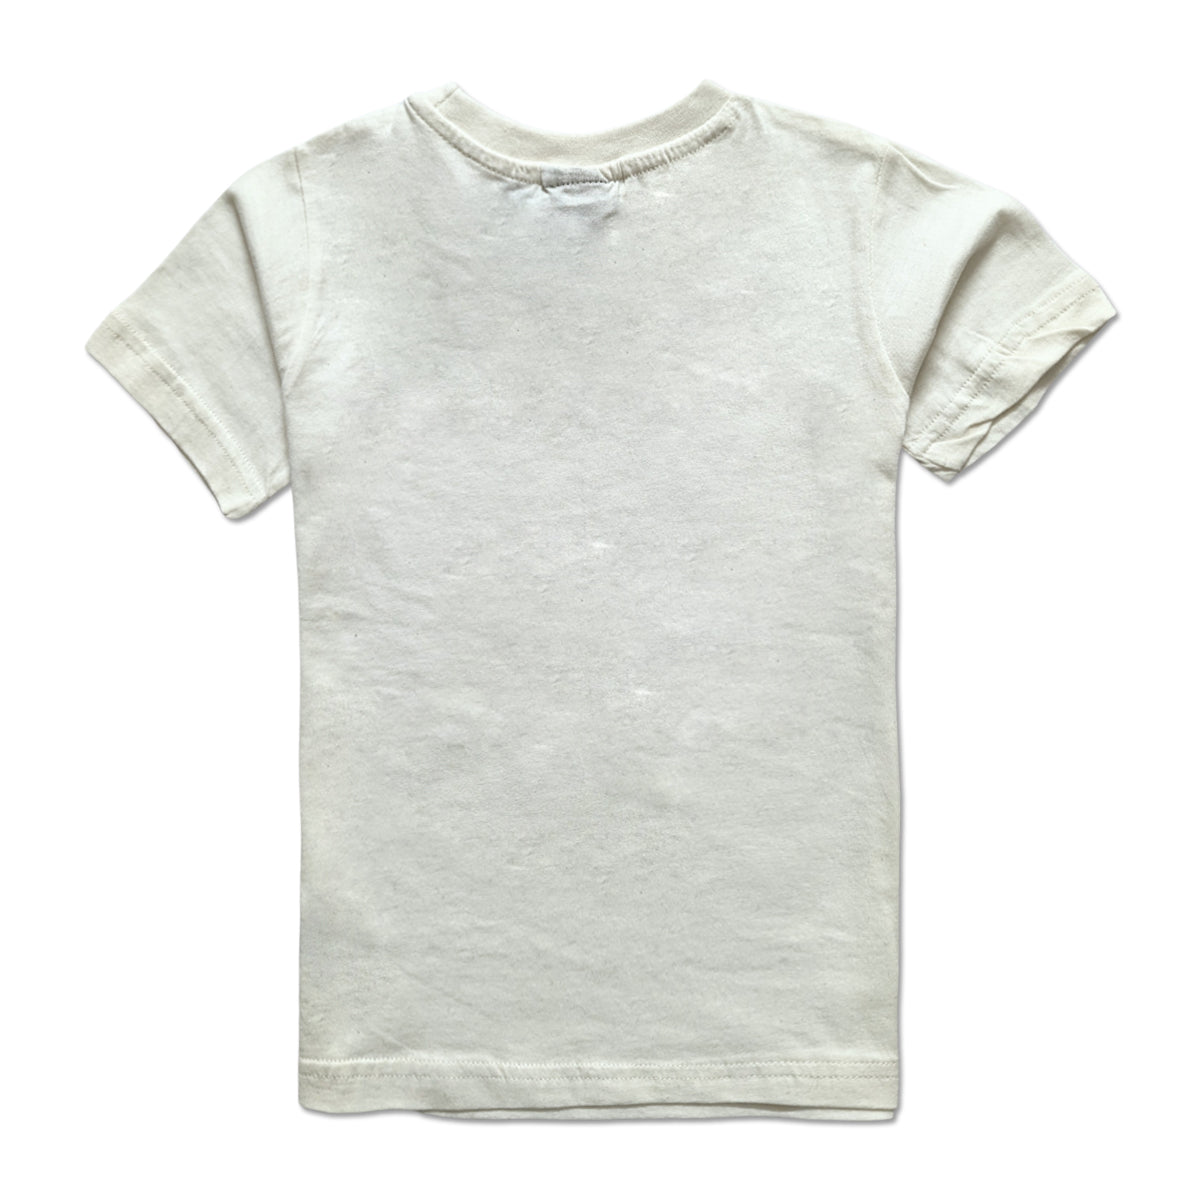 Brand Expo Premium Quality Branded Half Sleeves T-Shirt for Boy's